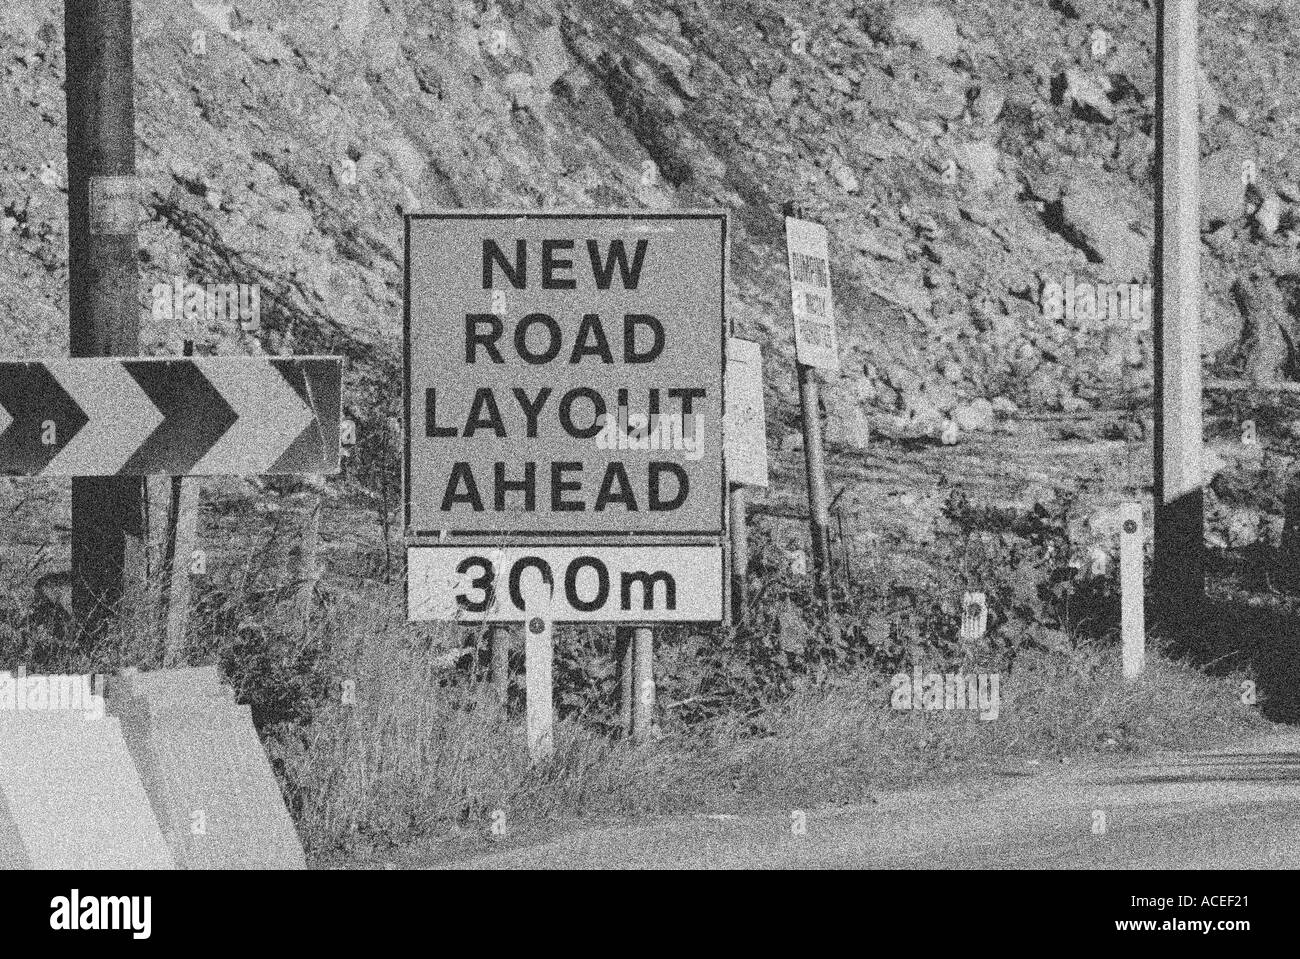 A roadside sign for 'New Road Layout Ahead' Stock Photo